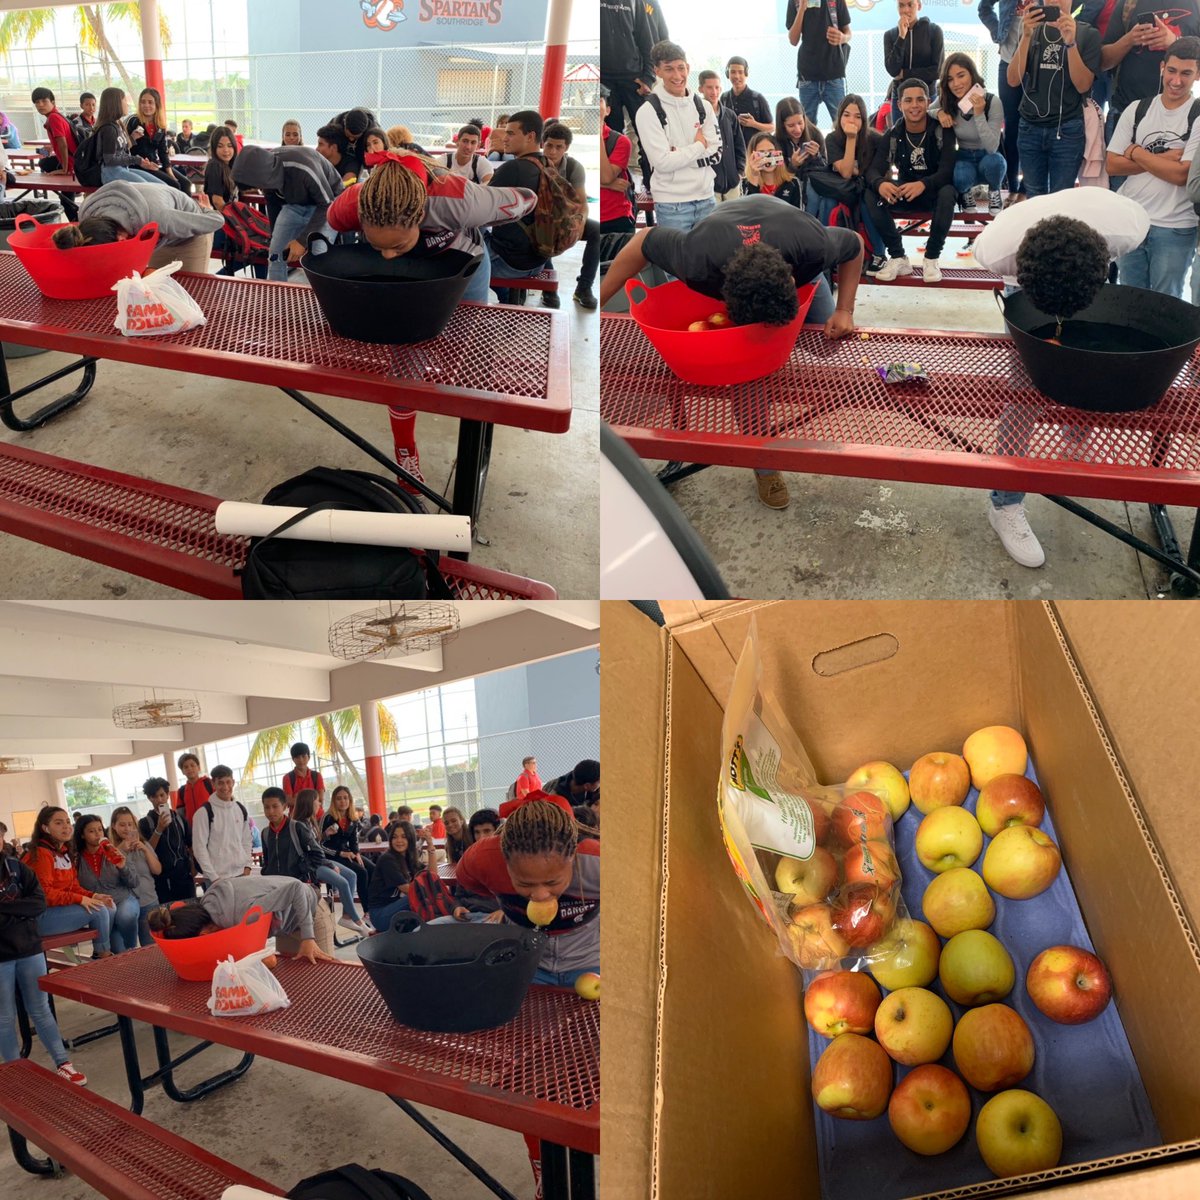 TGIF! #AppleBob! Serving w/ #positivity! #SpartanLunchBreaks are more than just chat & eat - promoting positivity as we #Interact to serve with @SAVEPromise & @sandyhook ‘s mission to #SafeSchools